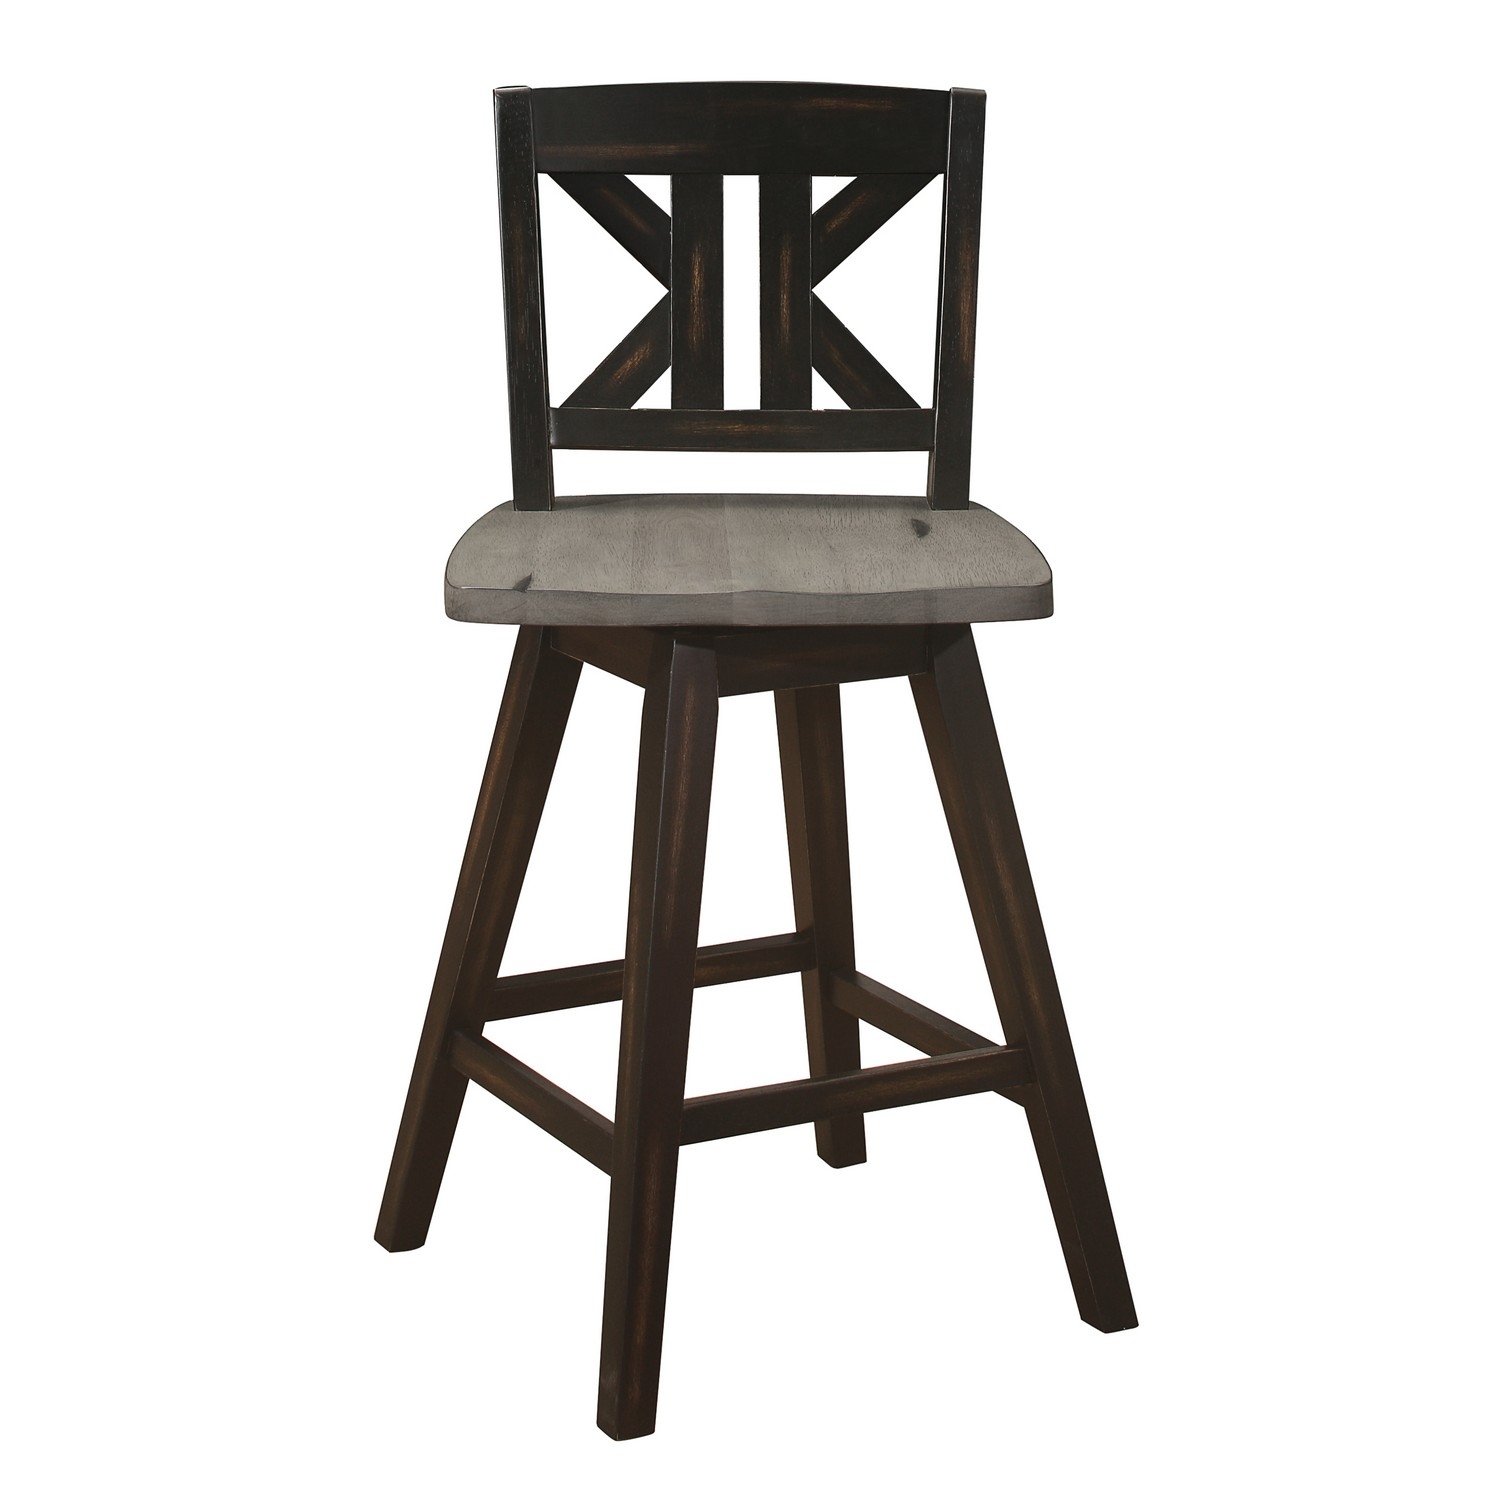 Homelegance Amsonia Swivel Counter Height Chair - Distressed Gray/Black